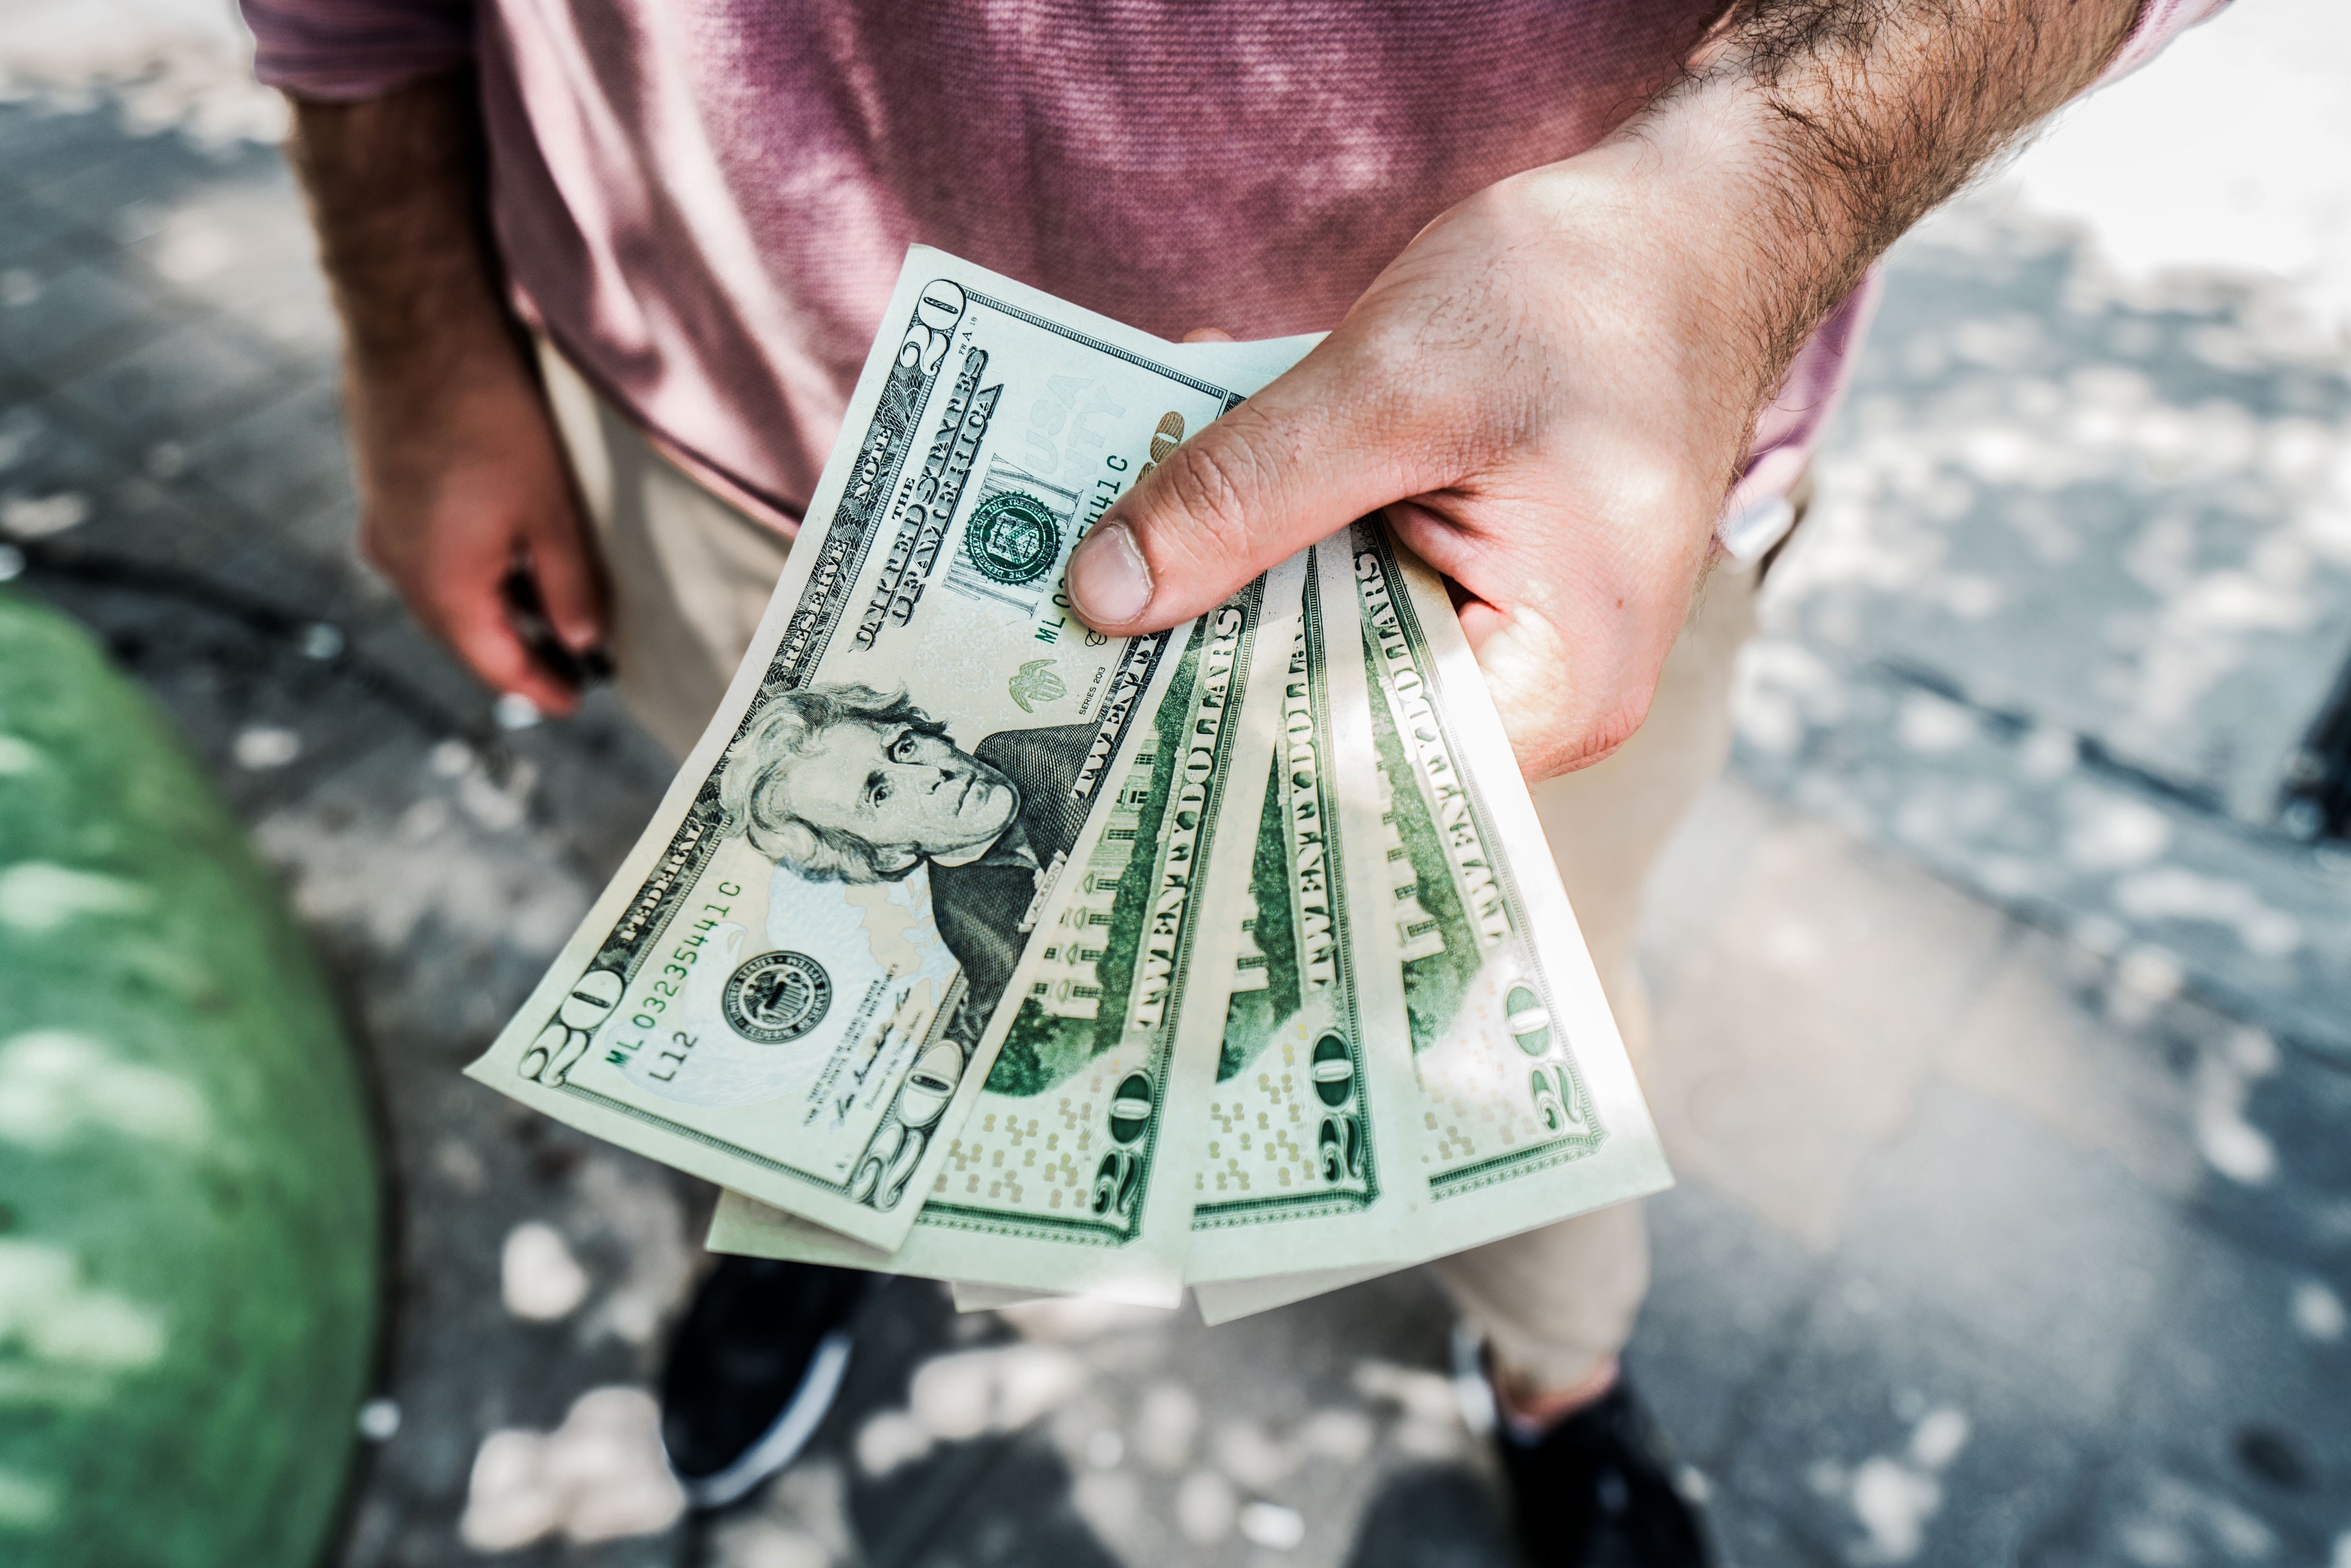 Money Images [207 Results] · Pexels · Free Stock Photos